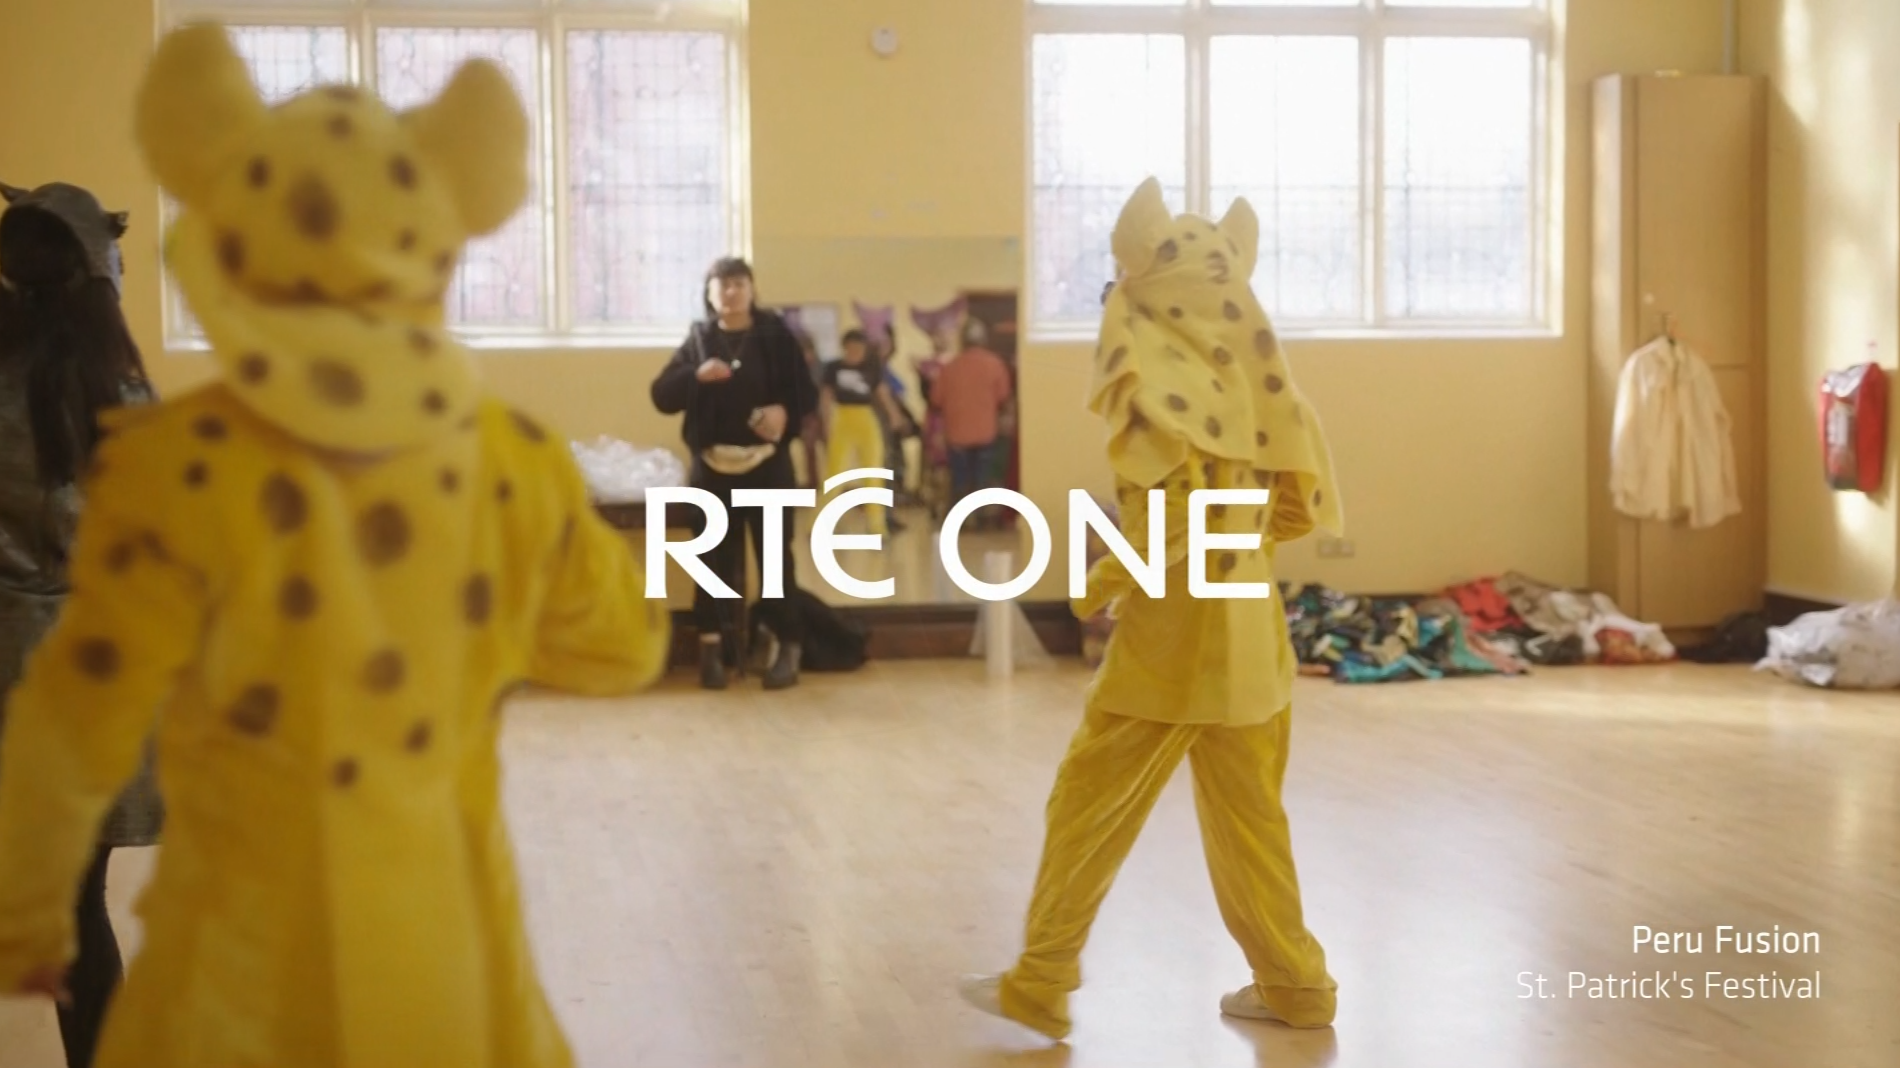 New idents from RTÉ for St Patrick's weekend Clean Feed